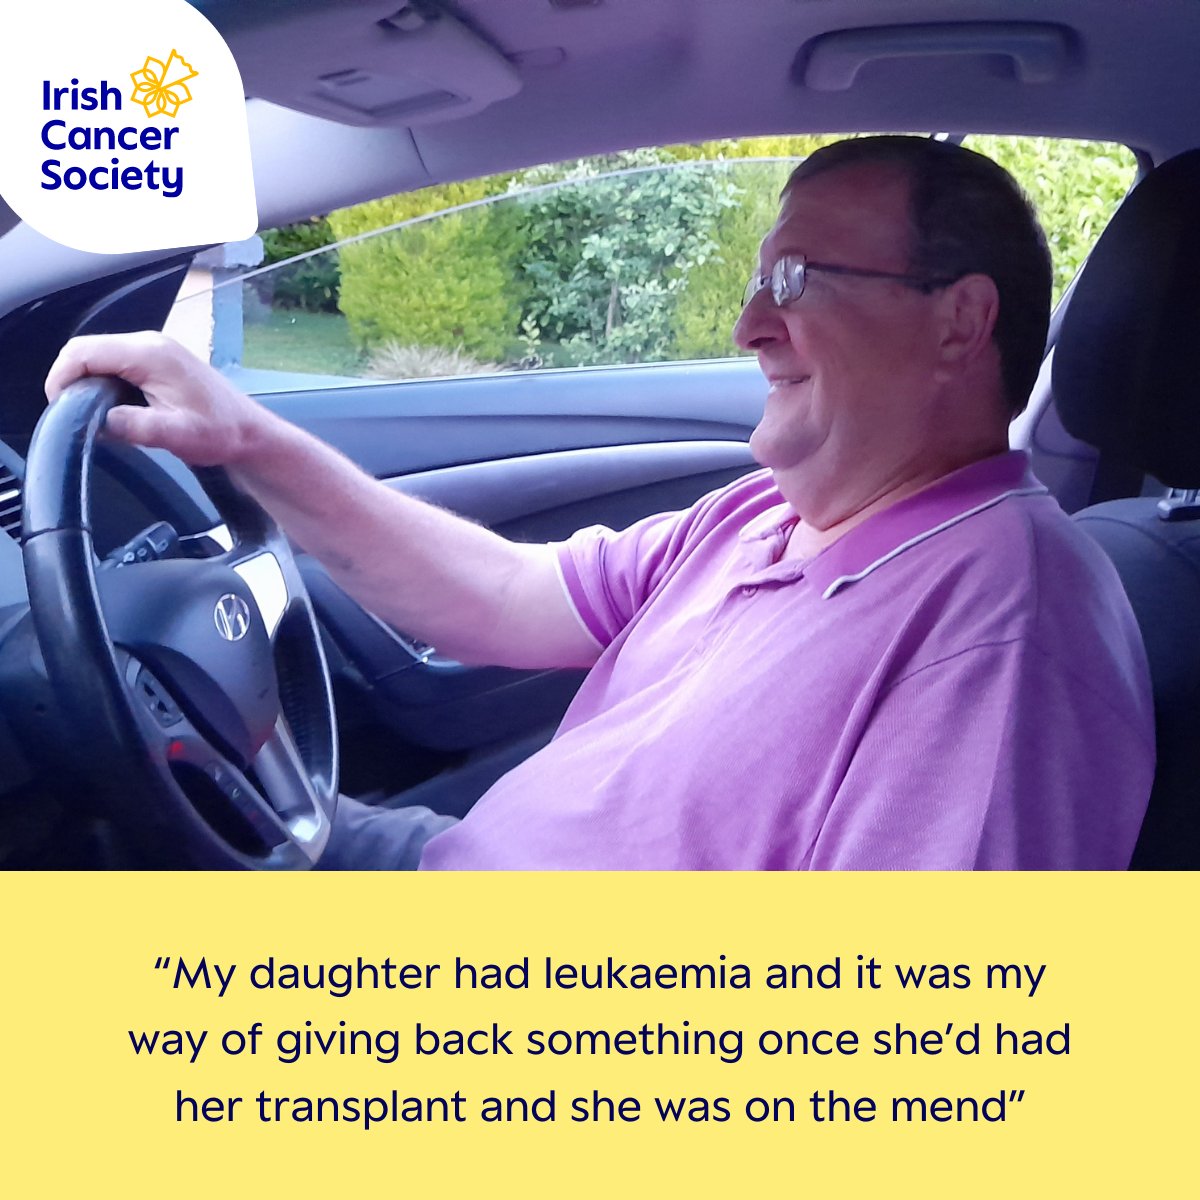 🚗✨ Volunteer Spotlight: Hugh McKernan ✨🚗 Volunteering has been deeply fulfilling for Hugh, 'Since I’ve started doing it, I’ve gotten a lot of out of it. I get great joy listening to people, whether they're sharing good news or tough moments.' See cancer.ie/volunteer